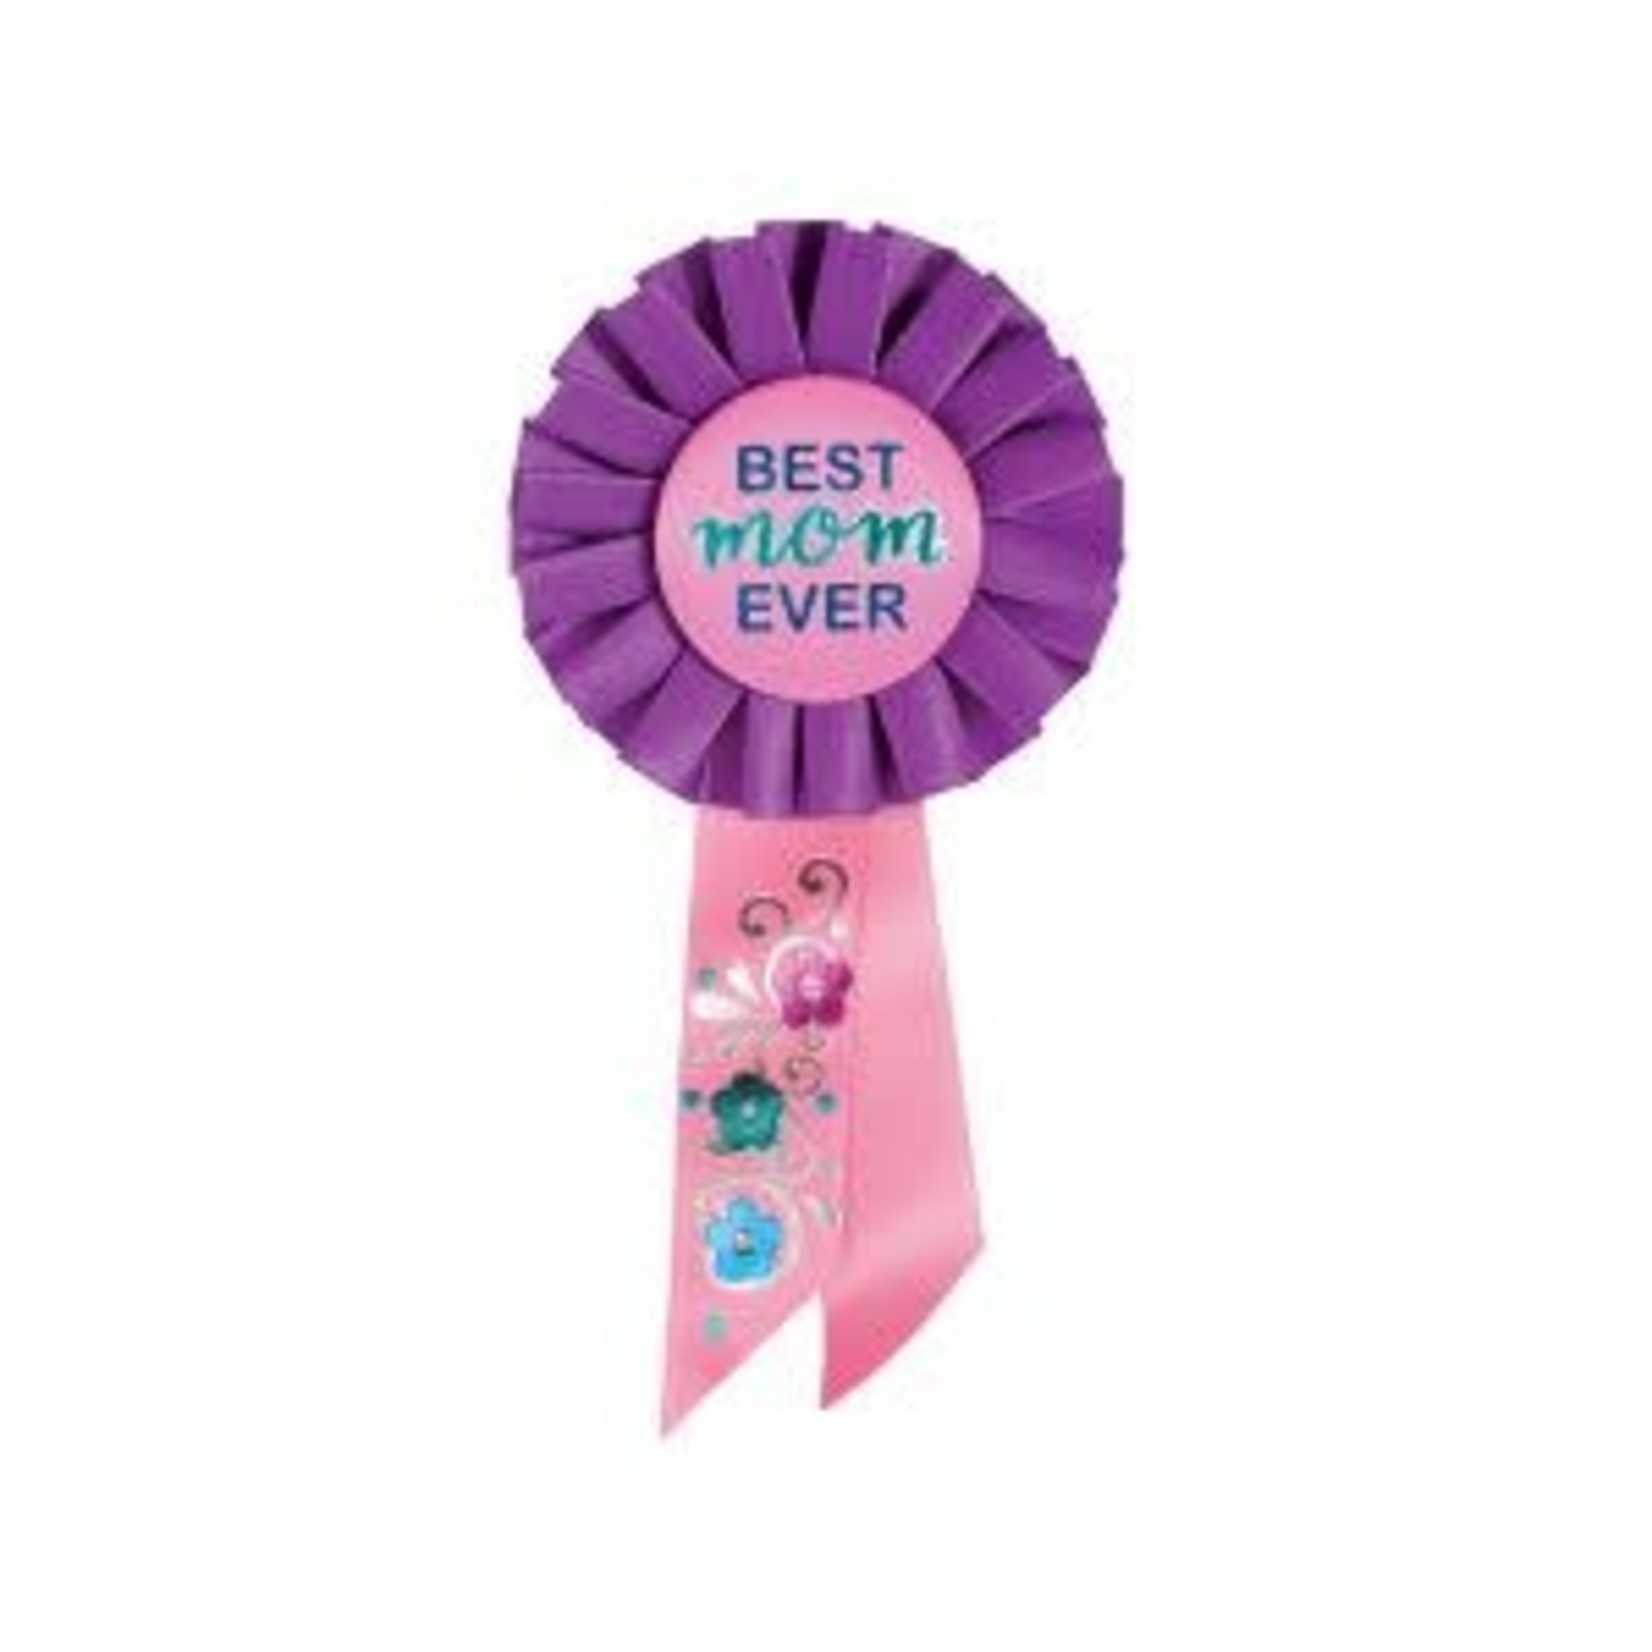 Beistle Best Mom Ever Ribbon Button - 1ct.